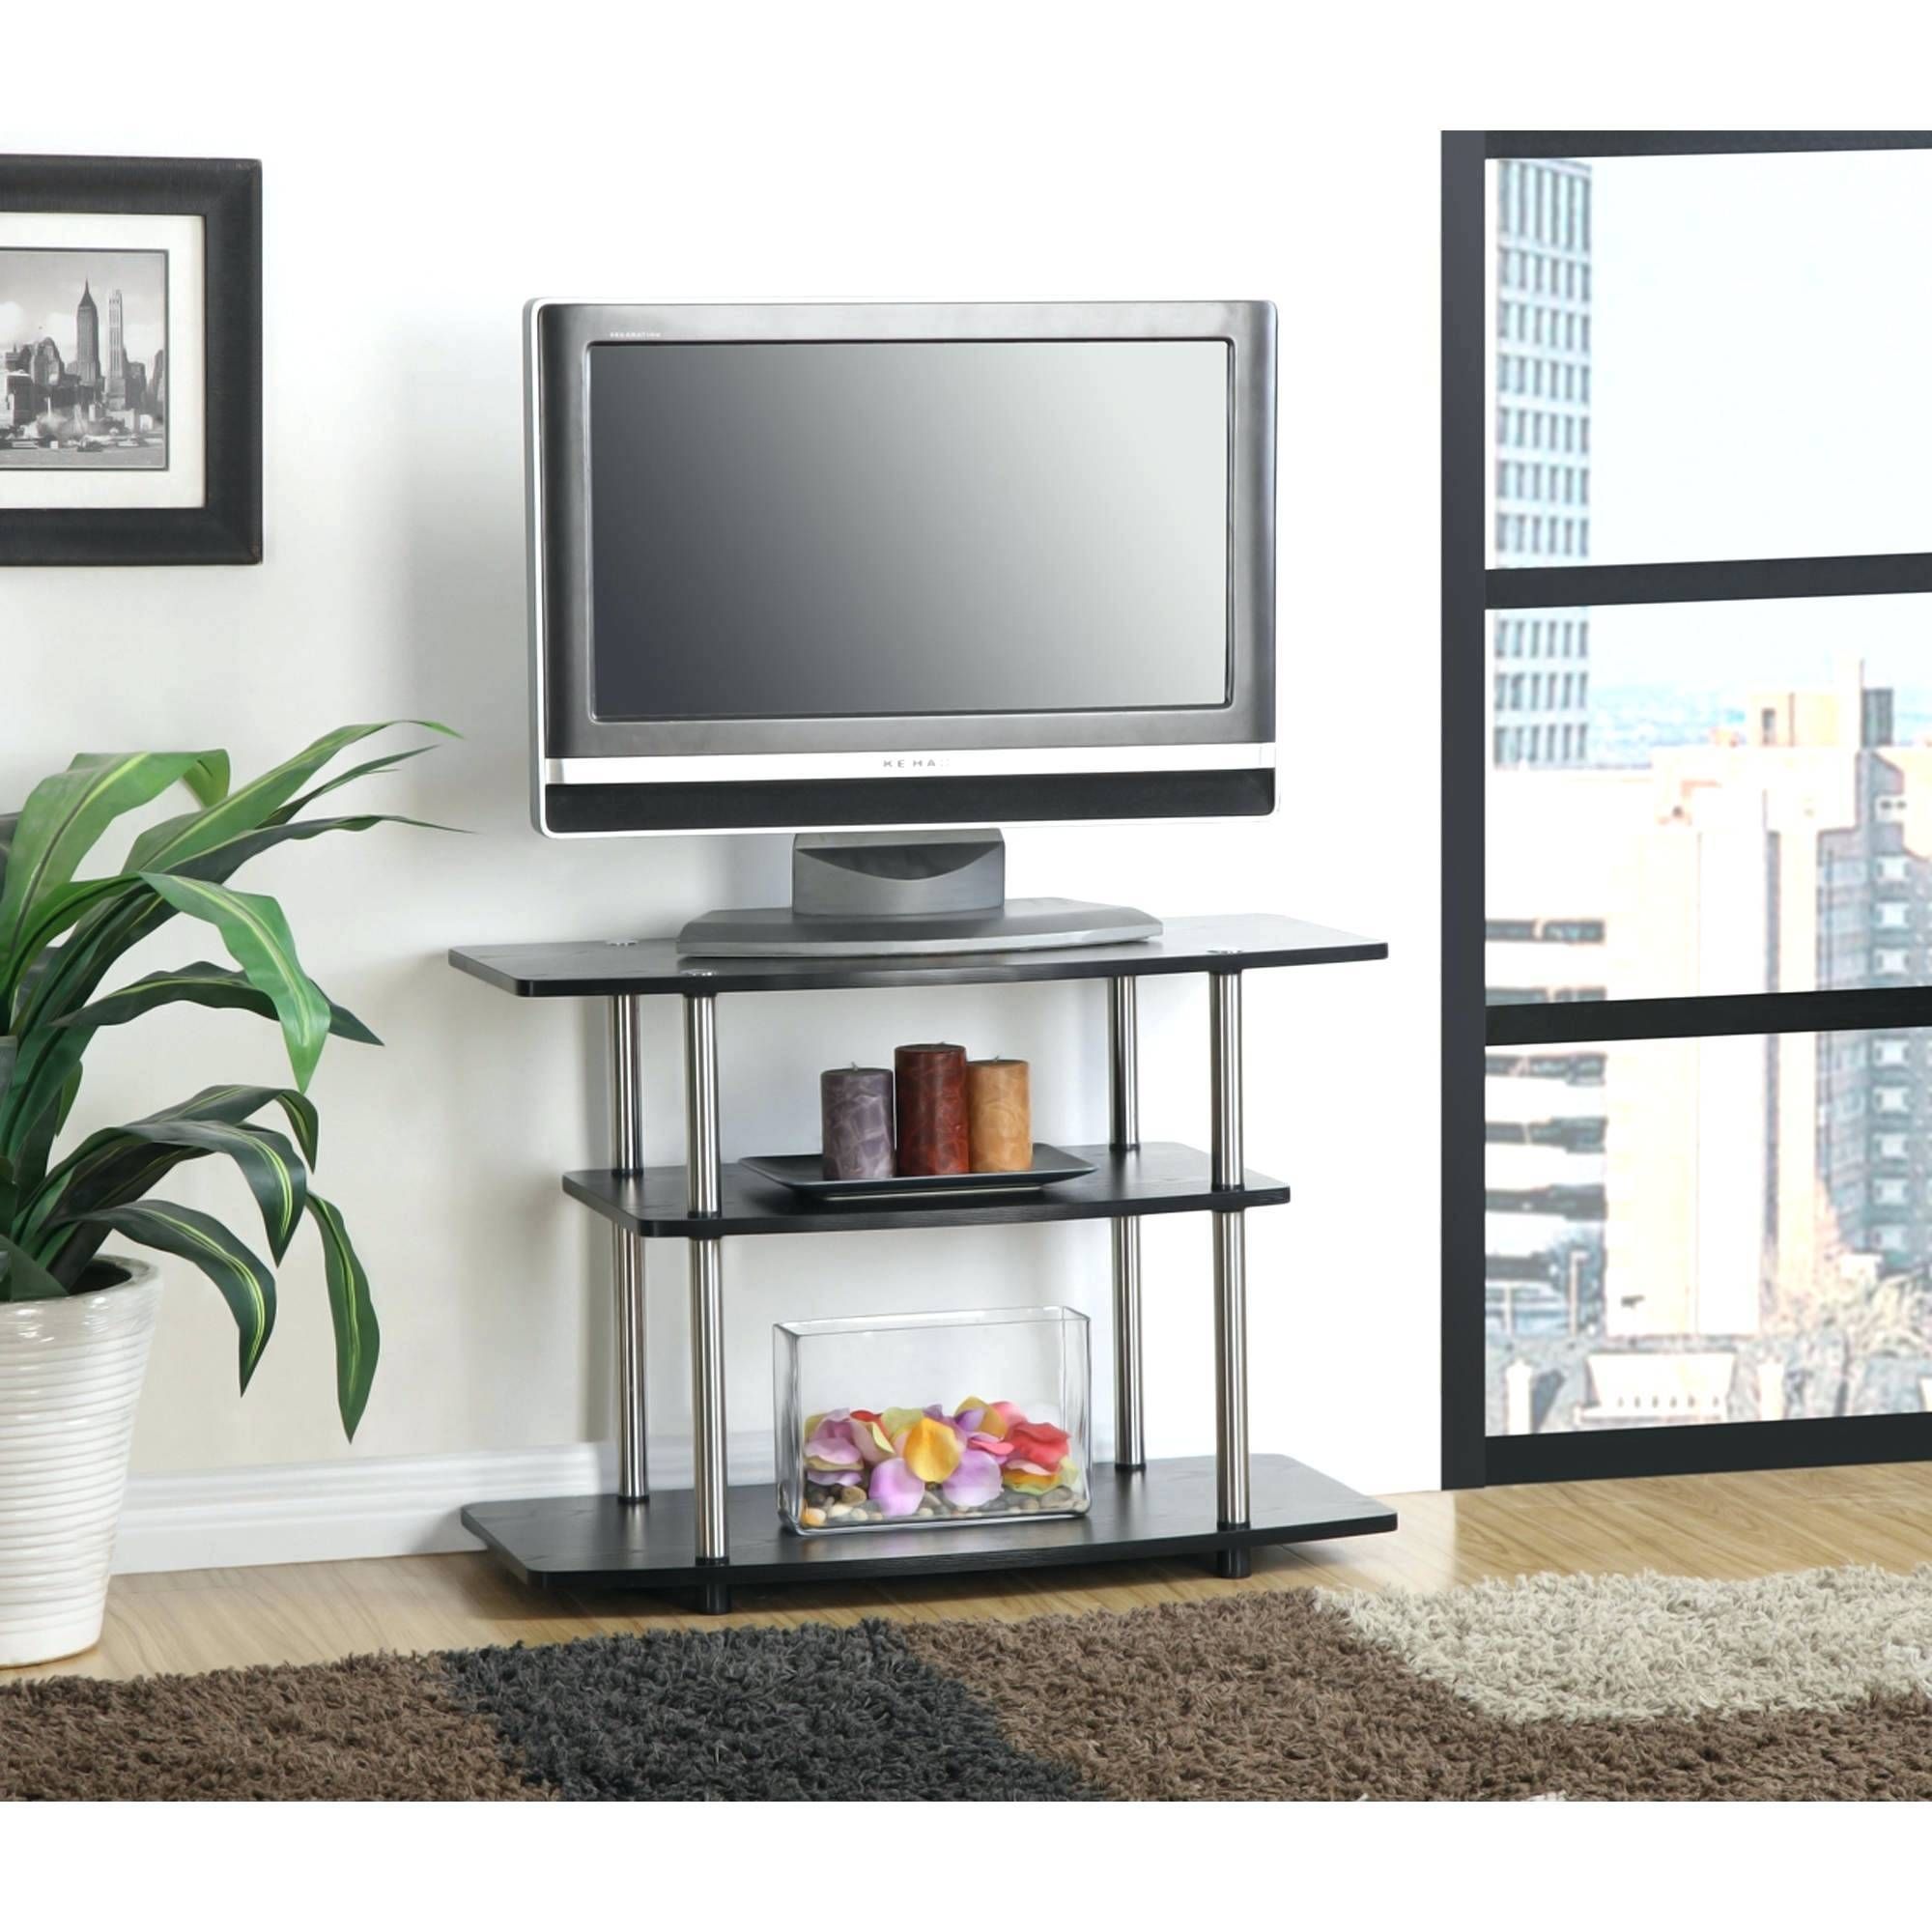 Tv Stand : Large Size Of Tv Standstall Thin Tv Stand And Standthin Inside Tall Skinny Tv Stands (Photo 8 of 15)